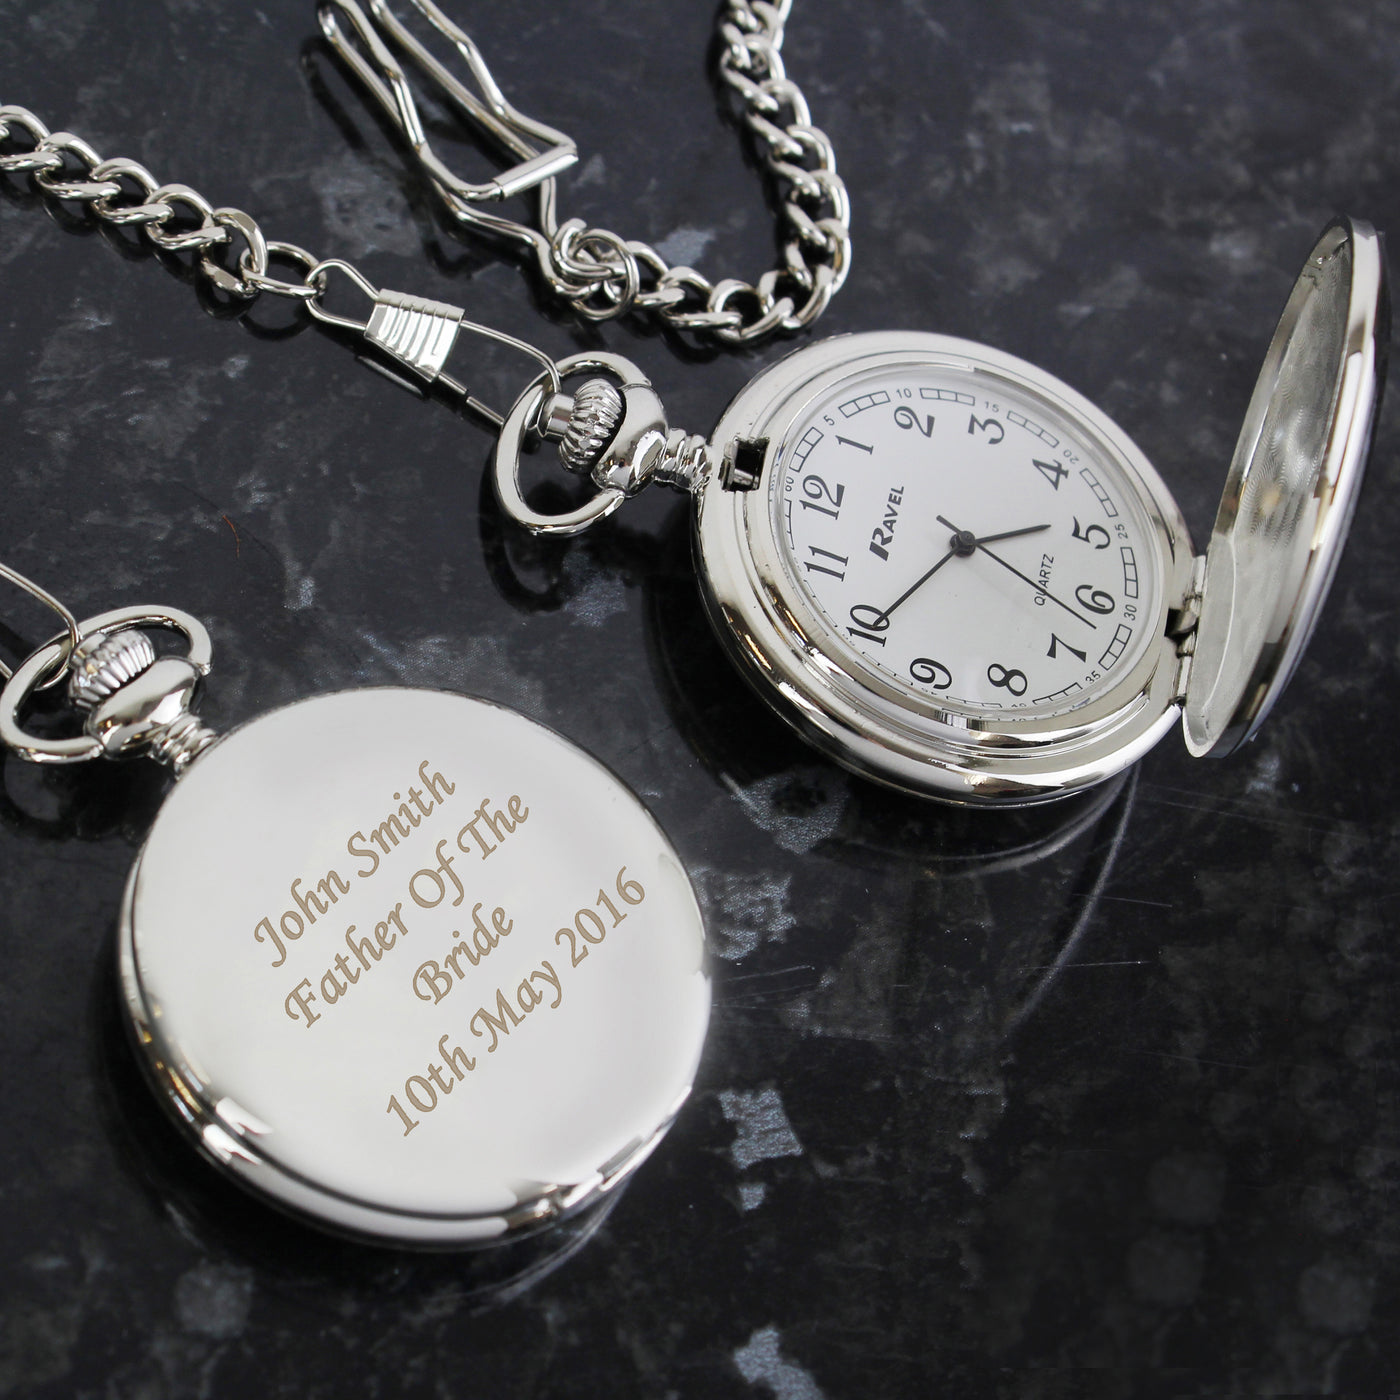 Personalised Pocket Fob Watch - TwoBeeps.co.uk